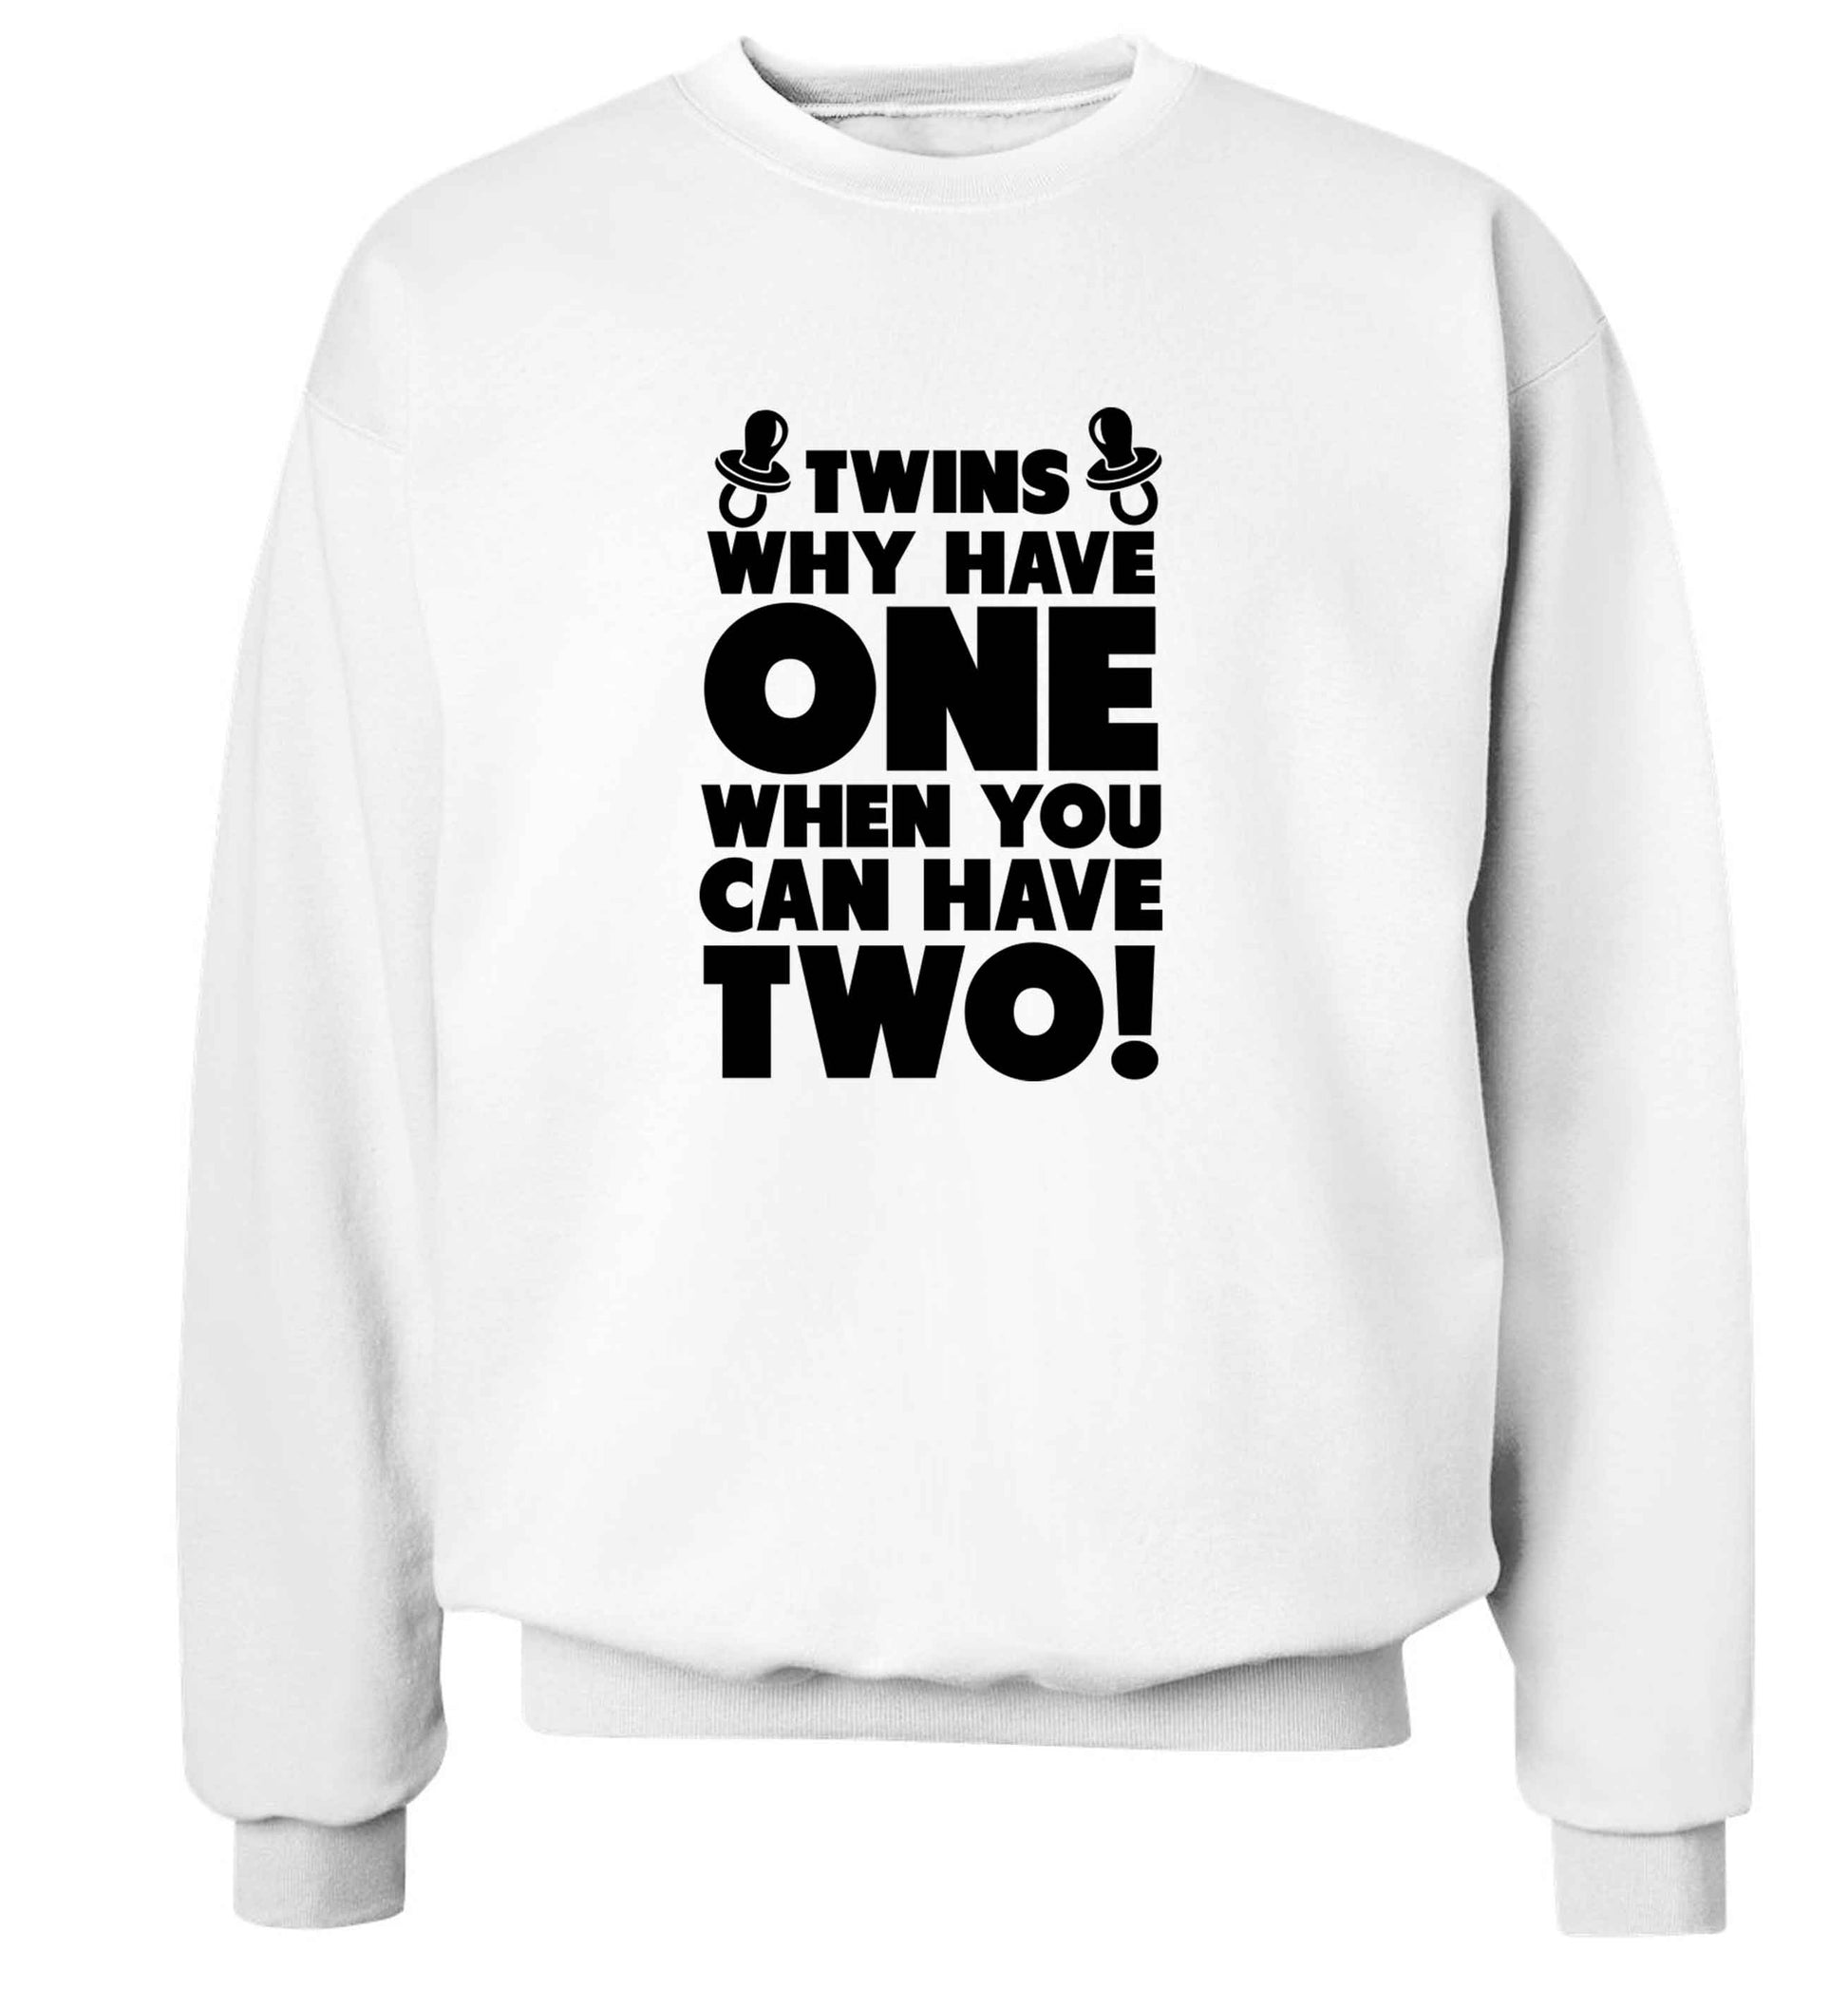 Twins why have one when you can have two adult's unisex white sweater 2XL